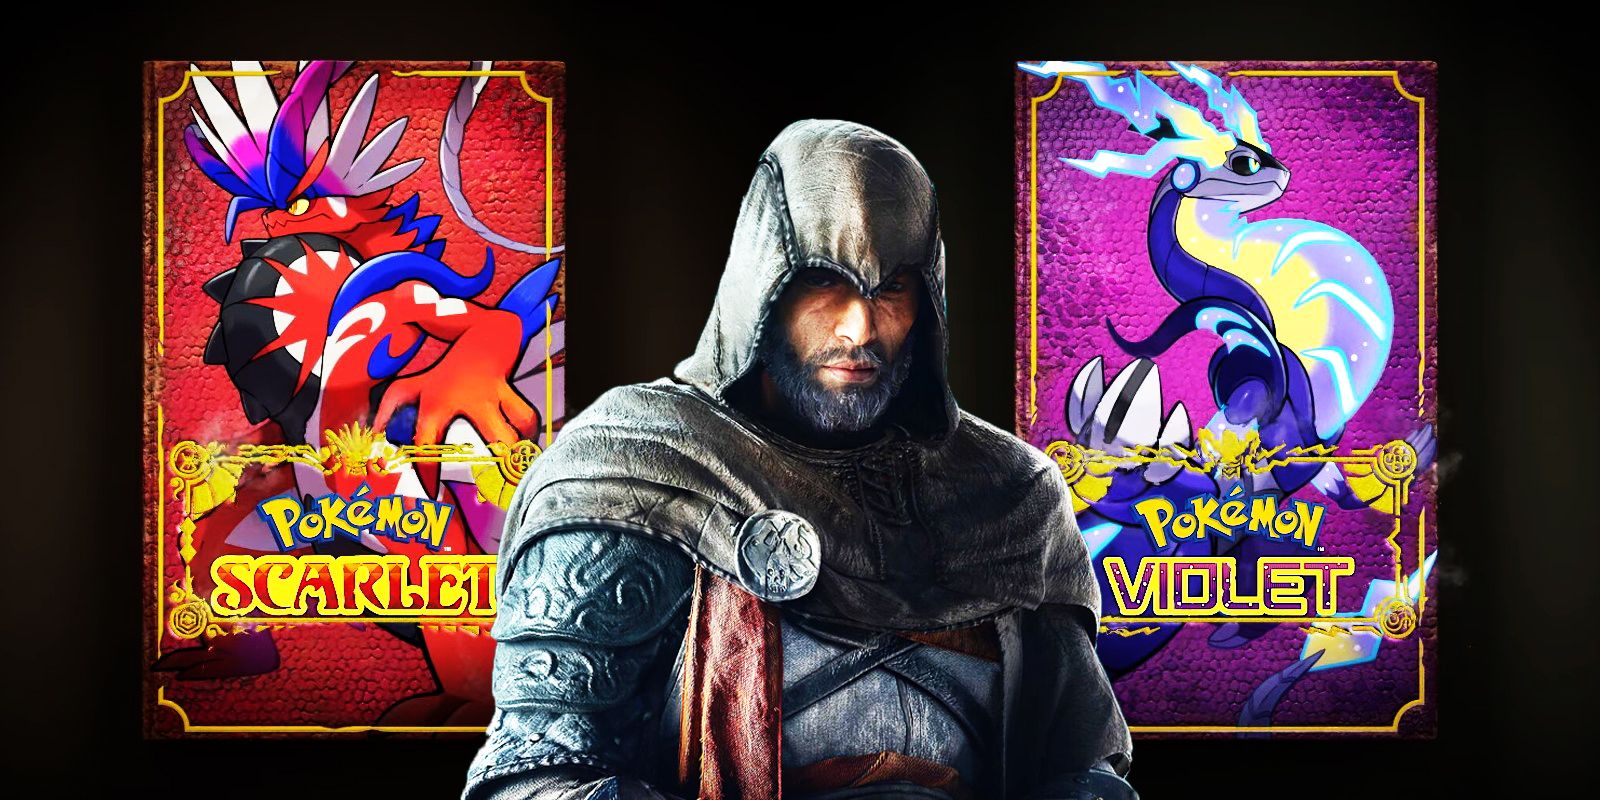 Assassin's Creed's Basim standing with the covers for Pokemon Scarlet and Violet